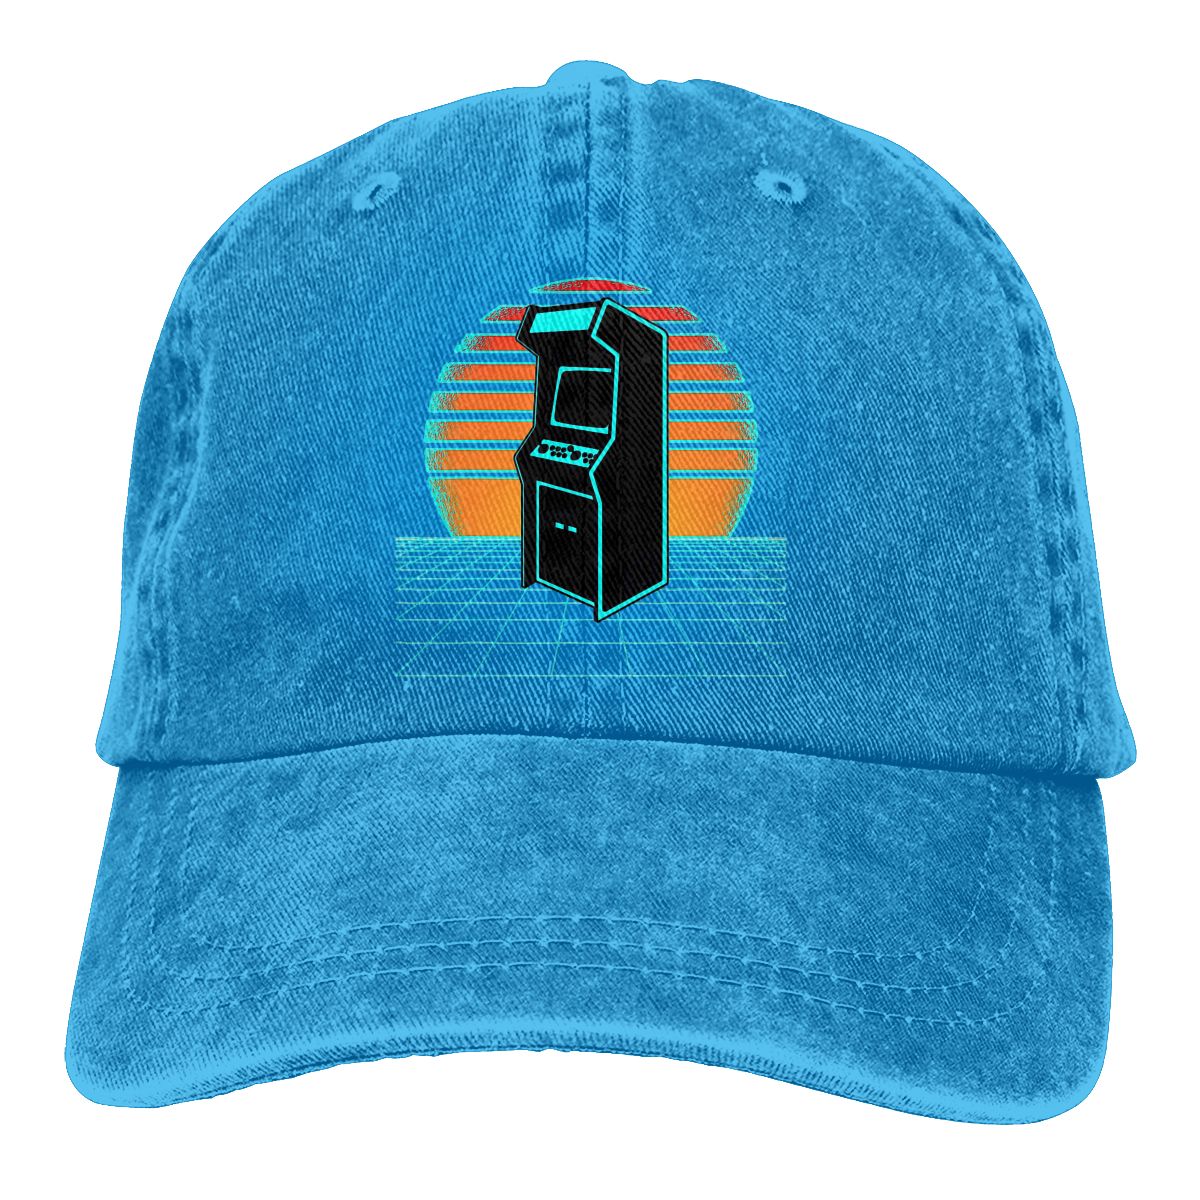 Aesthetic Video Gaming - 80s Arcade Game - Snapback Baseball Cap - Summer Hat For Men and Women-Blue-One Size-